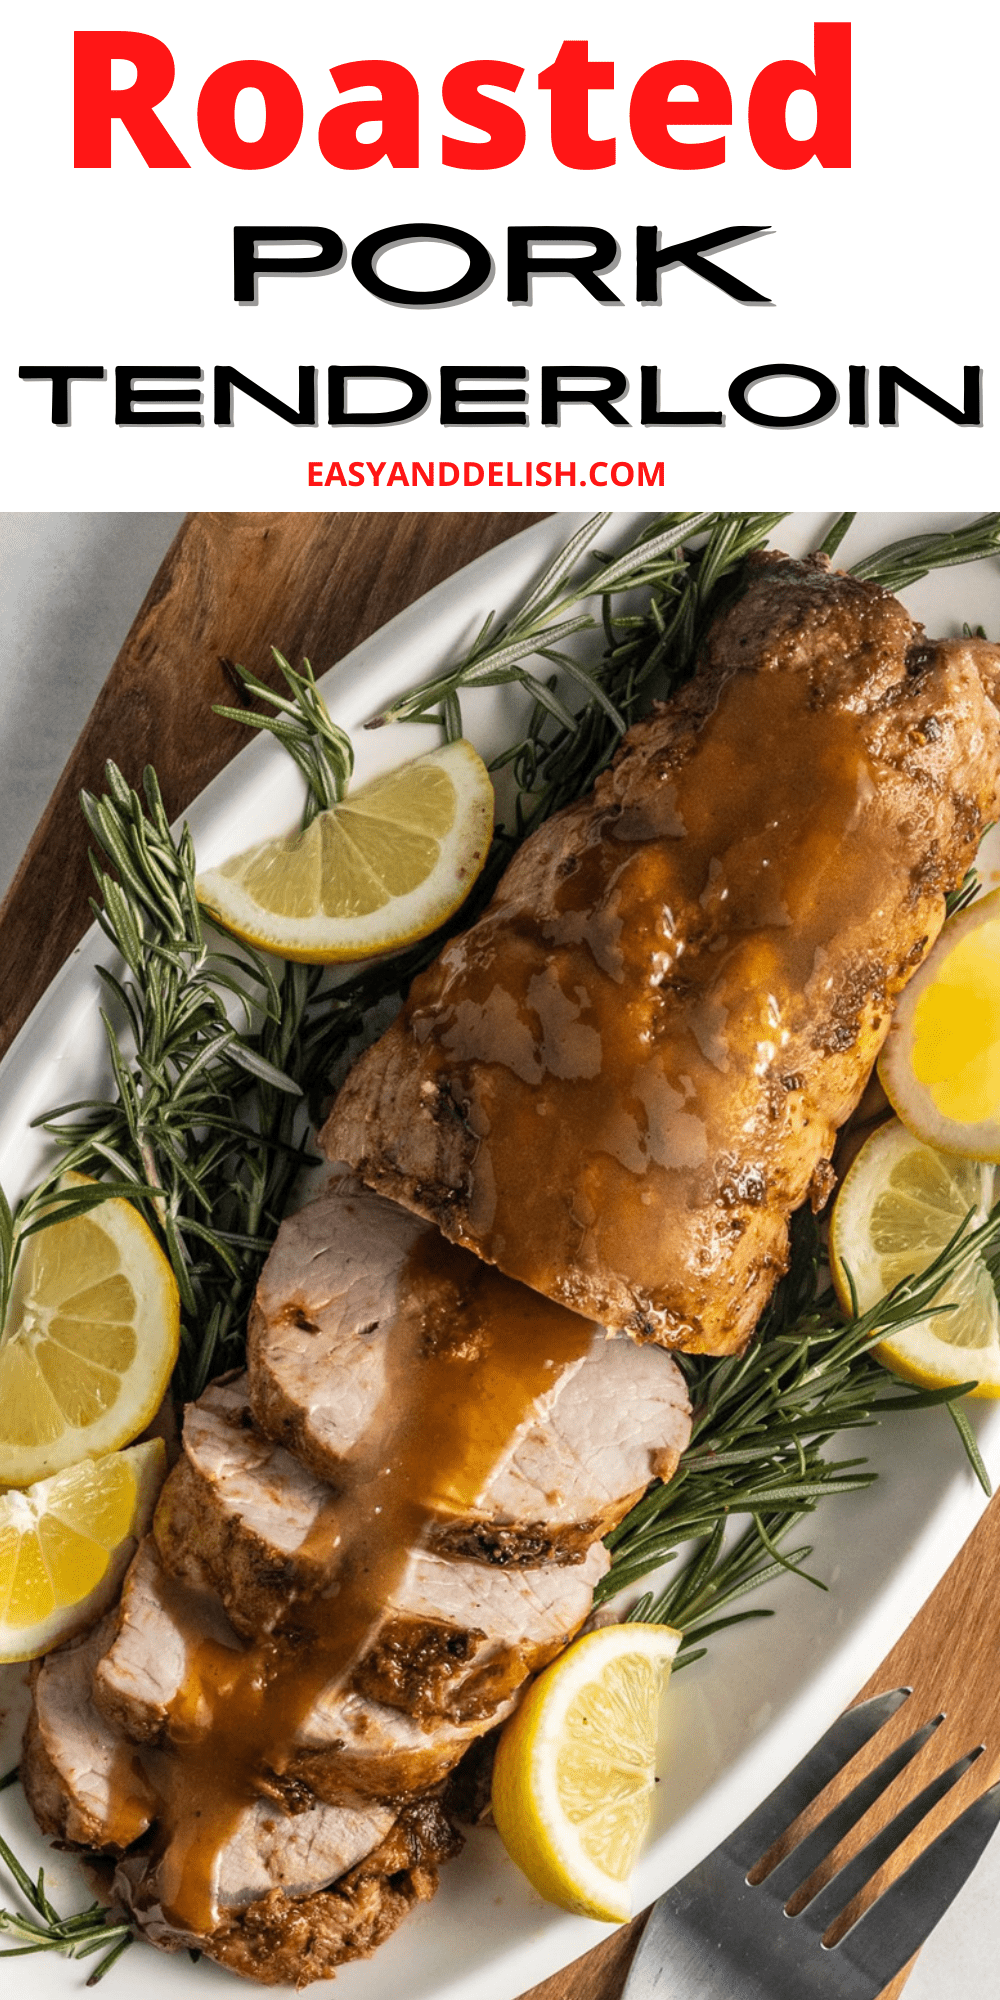 Close up of roasted pork tenderloin garnished with lemon and rosemary.